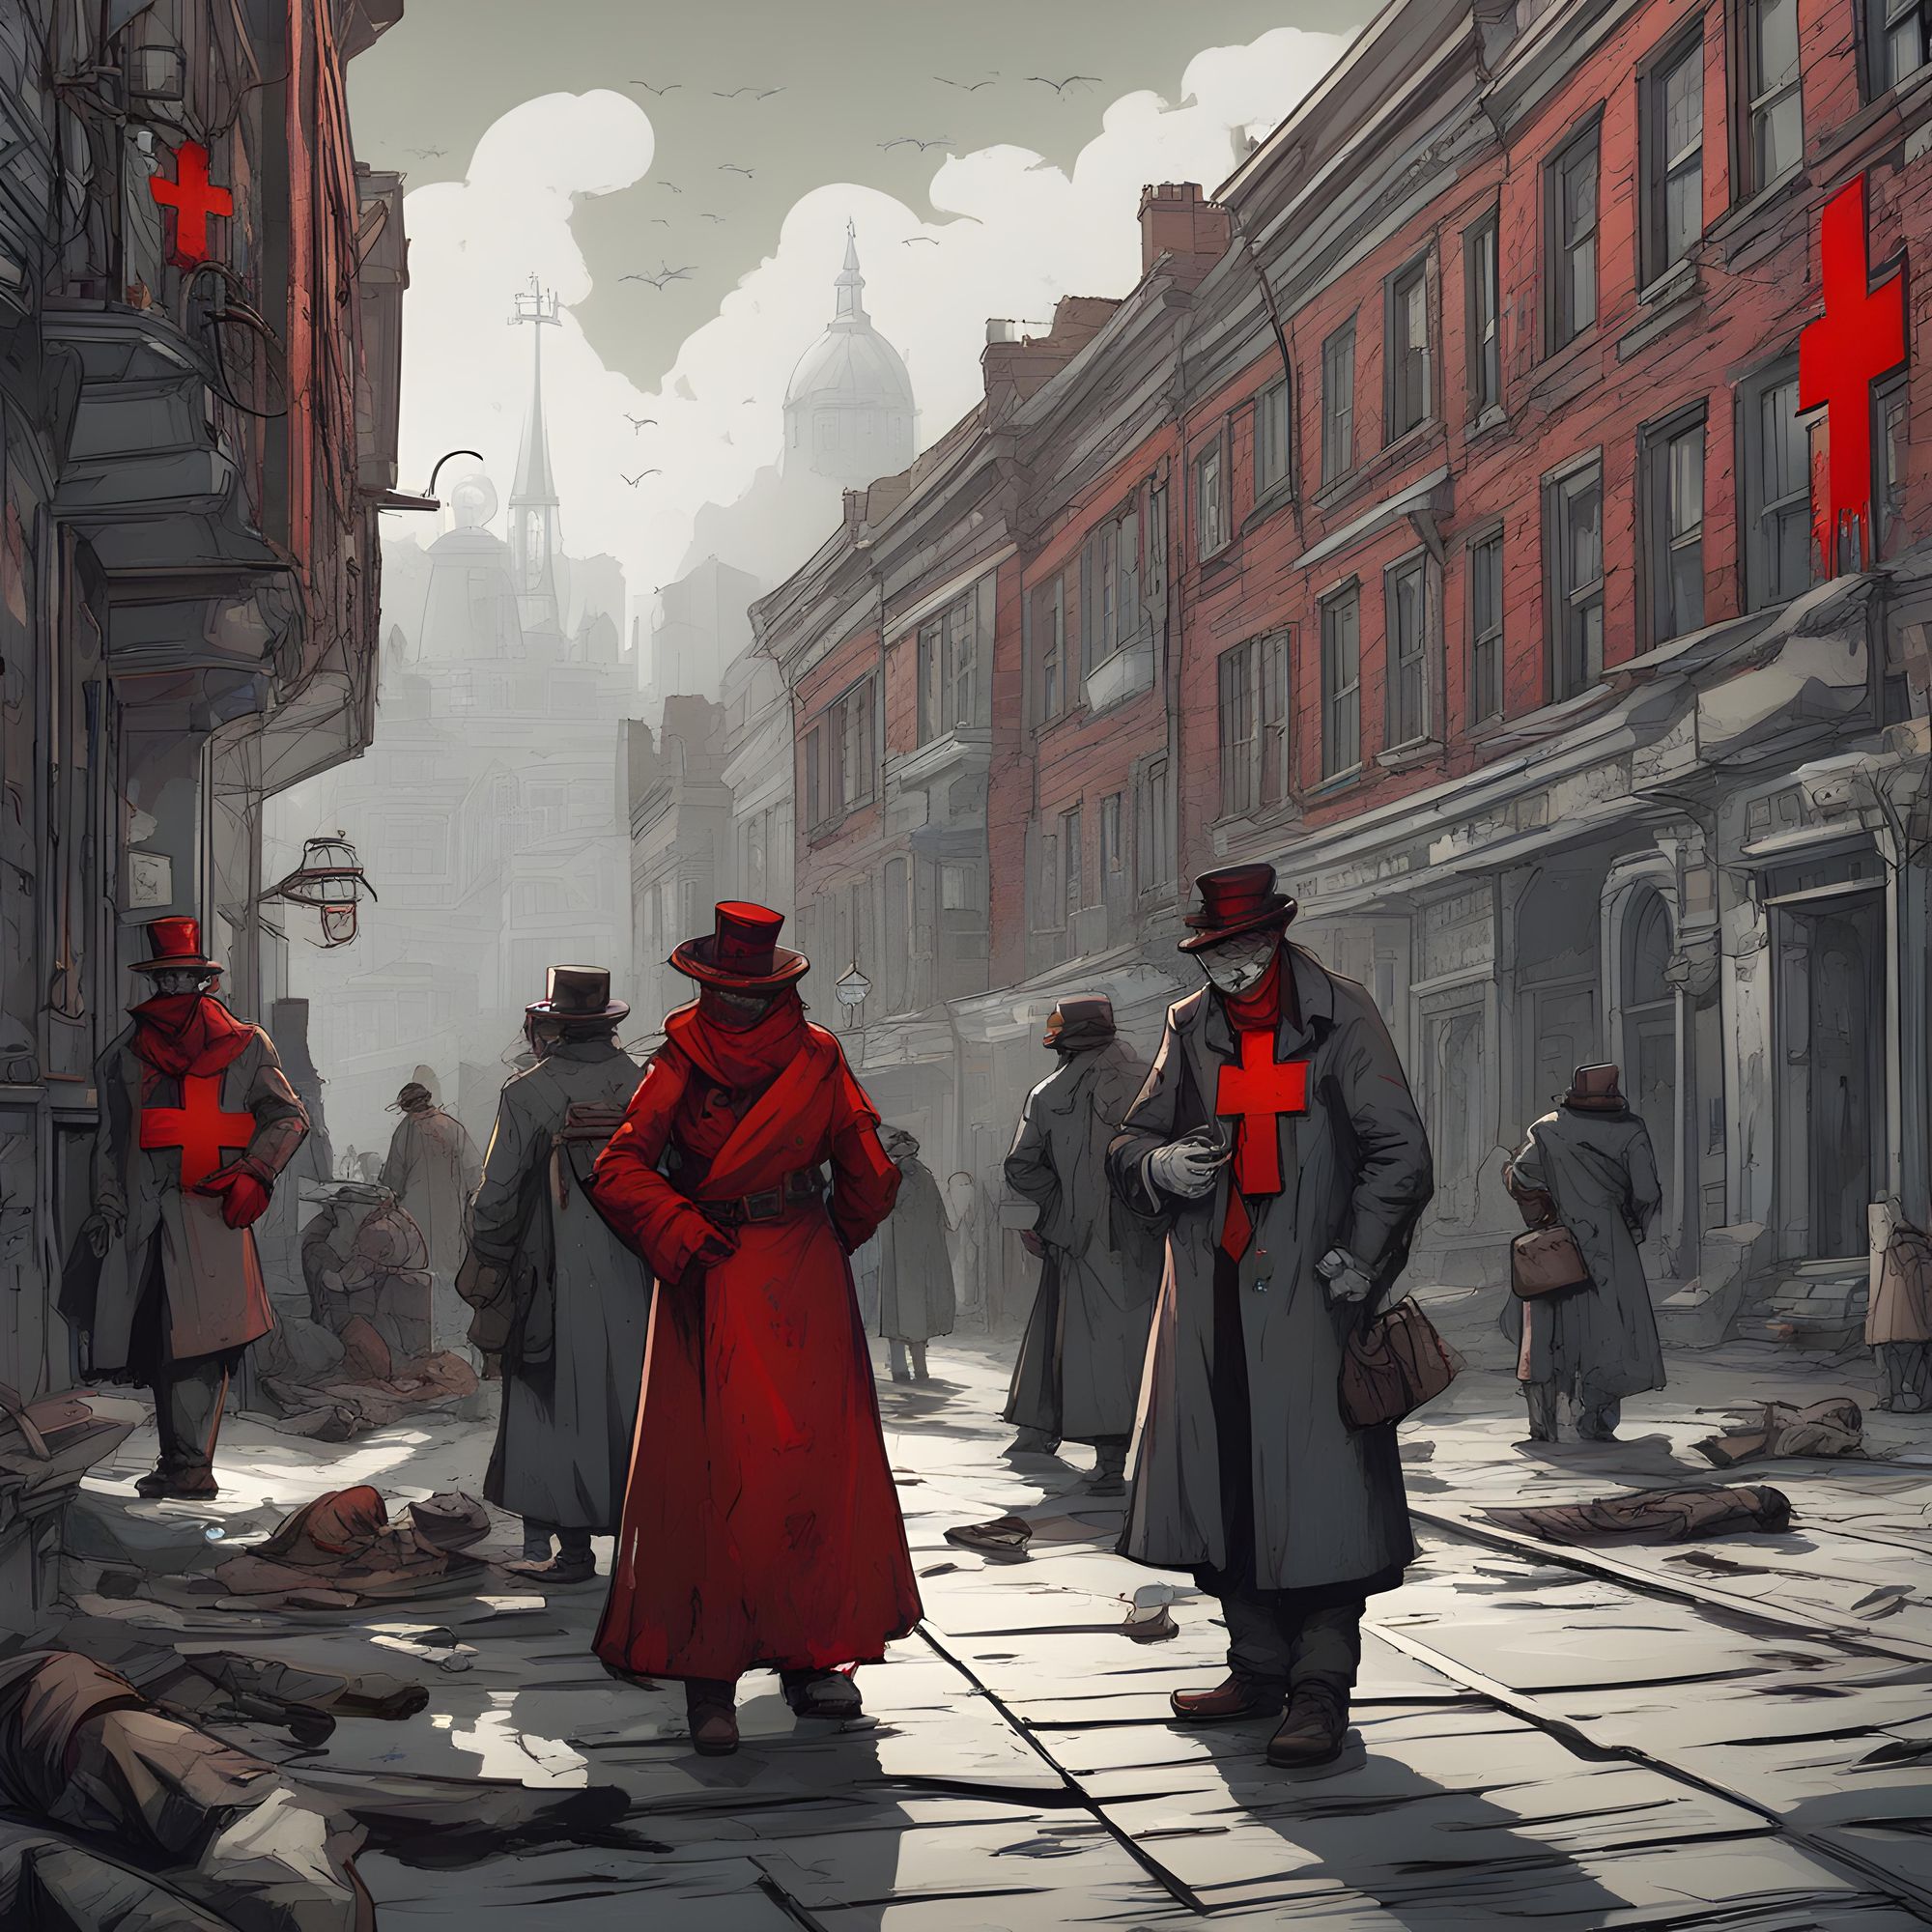 Some streets in the hospital distrcit are cleaner than others. Sometimes the sick are simply dumped in the streets. Doctors with their red crosses attend to what remains.